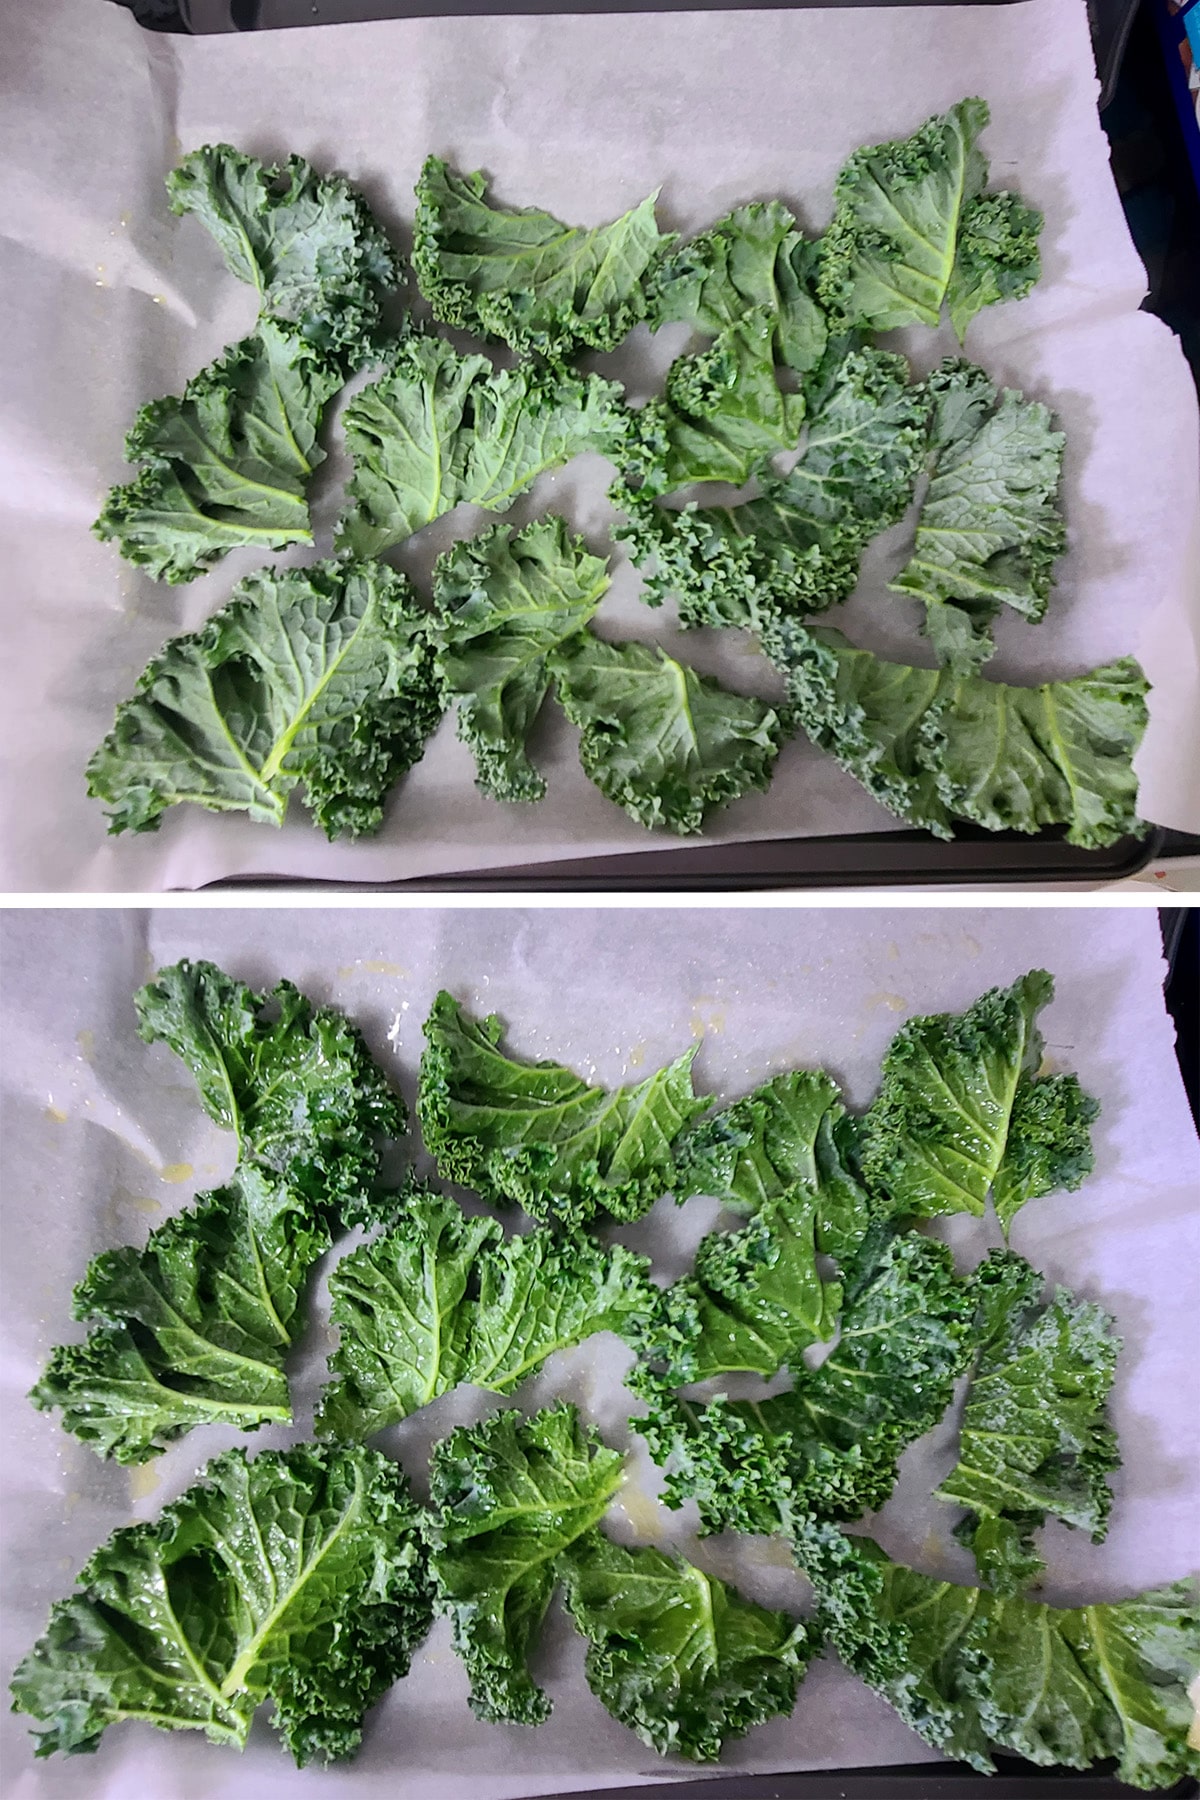 Kale leaves spread on a parchment lined baking sheet, sprayed with oil.